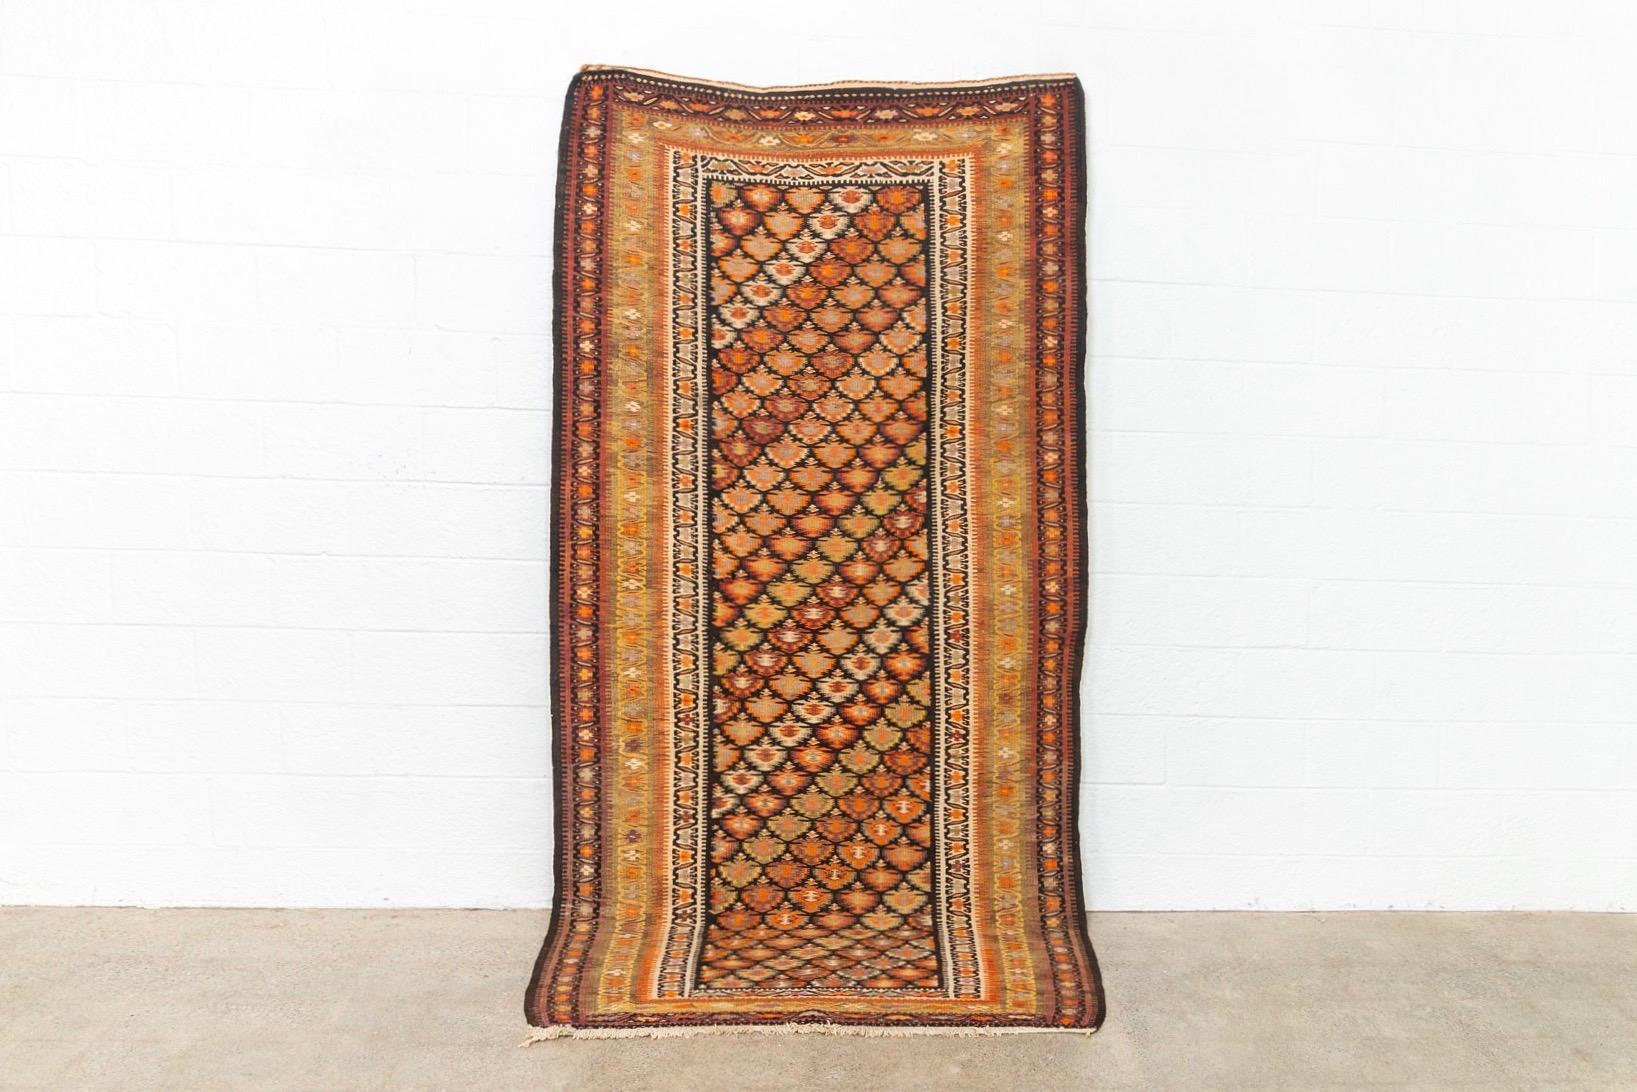 This elegant antique Veramin Kilim floor rug circa early to mid 1900s is expertly hand knotted from all-natural, vegetable-dyed wool and displays traditional Veramin style and tribal motifs. The intricate design is comprised of a symmetrical central